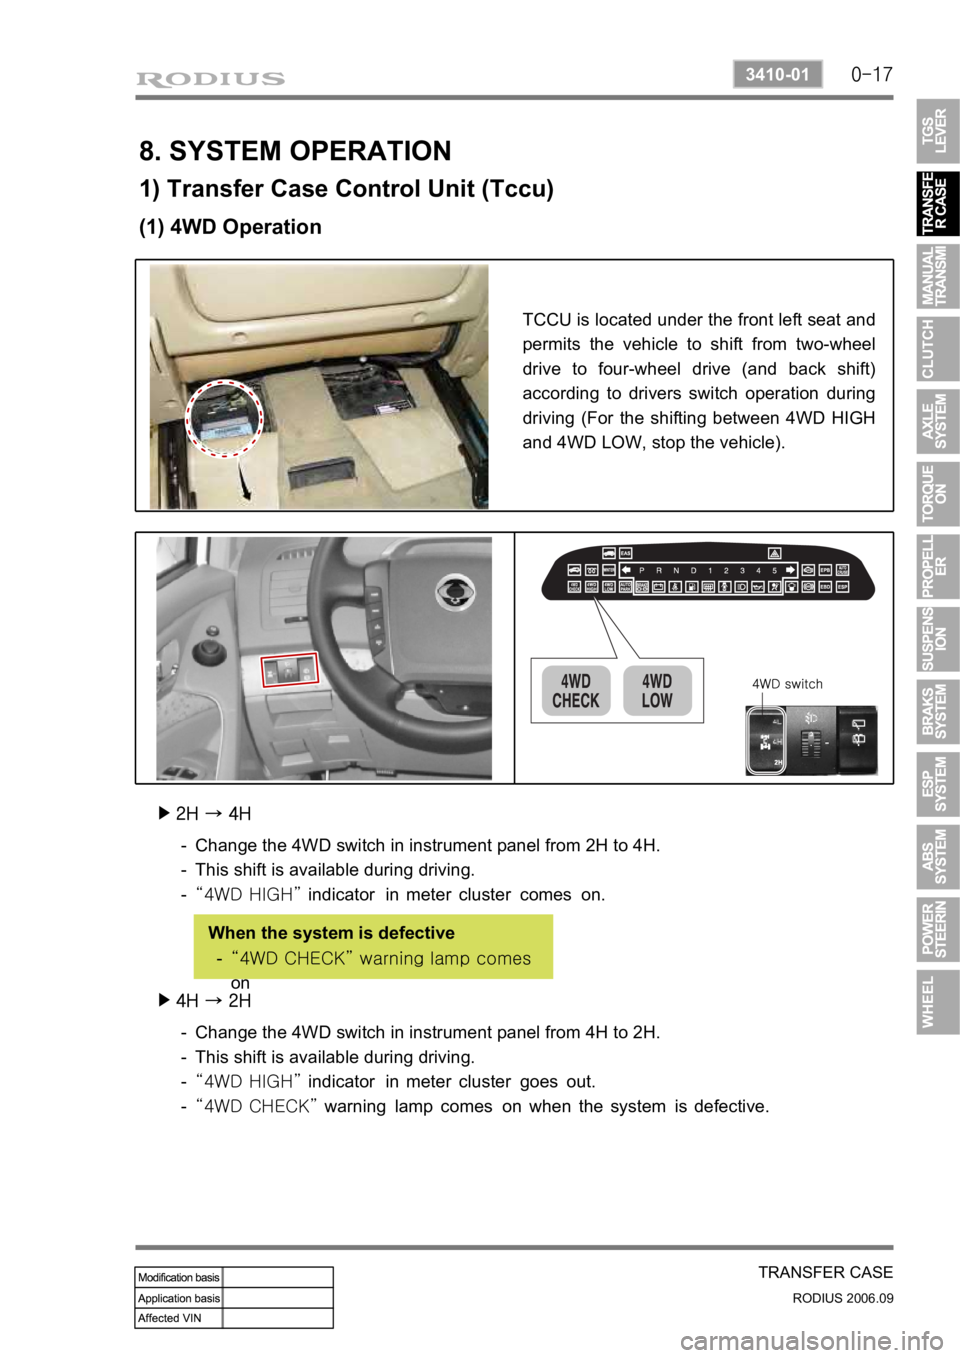 SSANGYONG RODIUS 2007  Service Manual 0-17
TRANSFER CASE
RODIUS 2006.09
3410-01
8. SYSTEM OPERATION
1) Transfer Case Control Unit (Tccu)
(1) 4WD Operation
TCCU is located under the front left seat and 
permits the vehicle to shift from tw